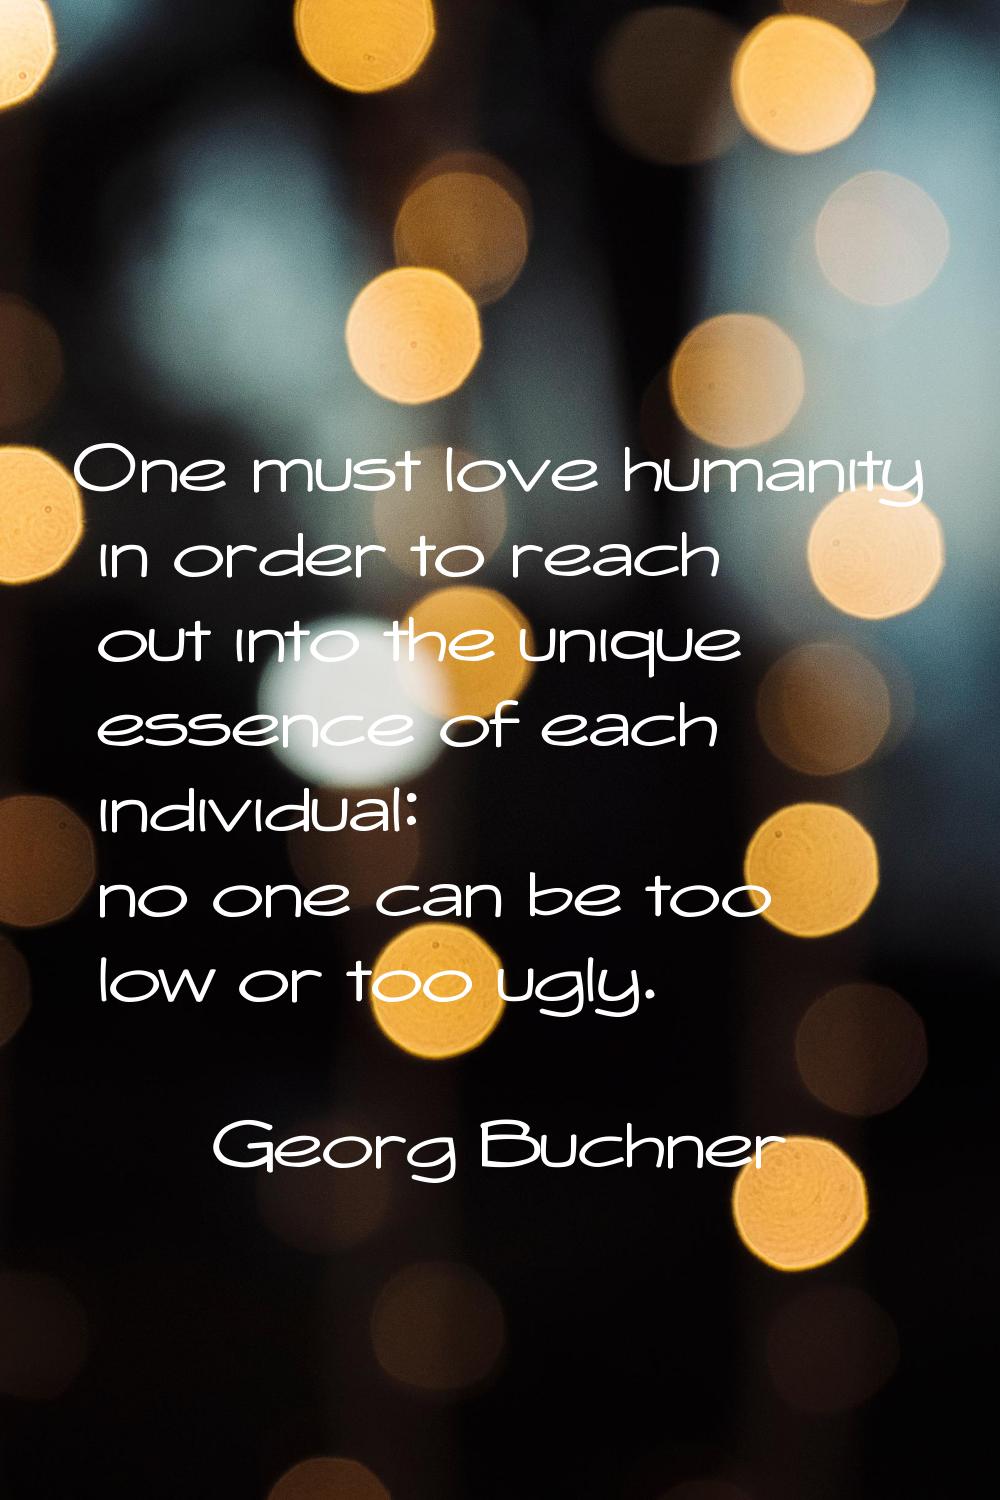 One must love humanity in order to reach out into the unique essence of each individual: no one can